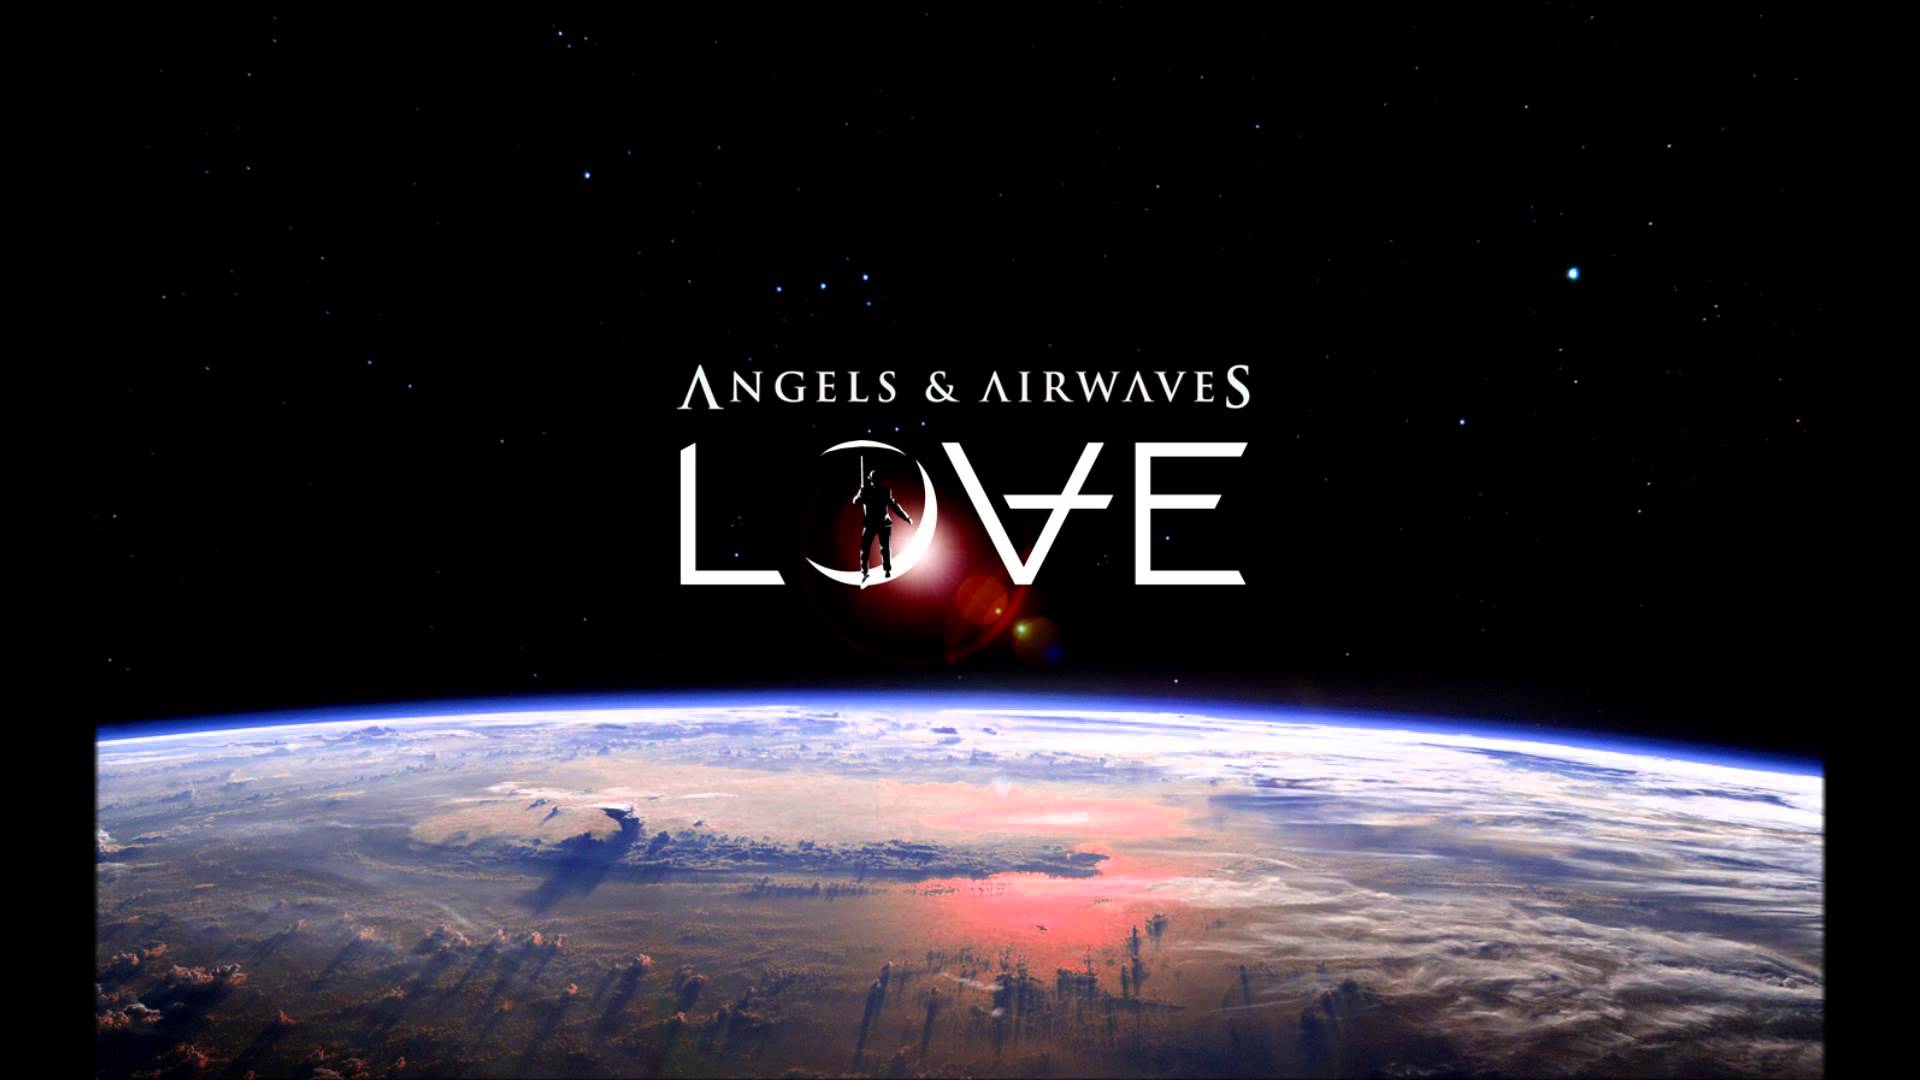 Angels and airwaves wallpaper 1920x1080